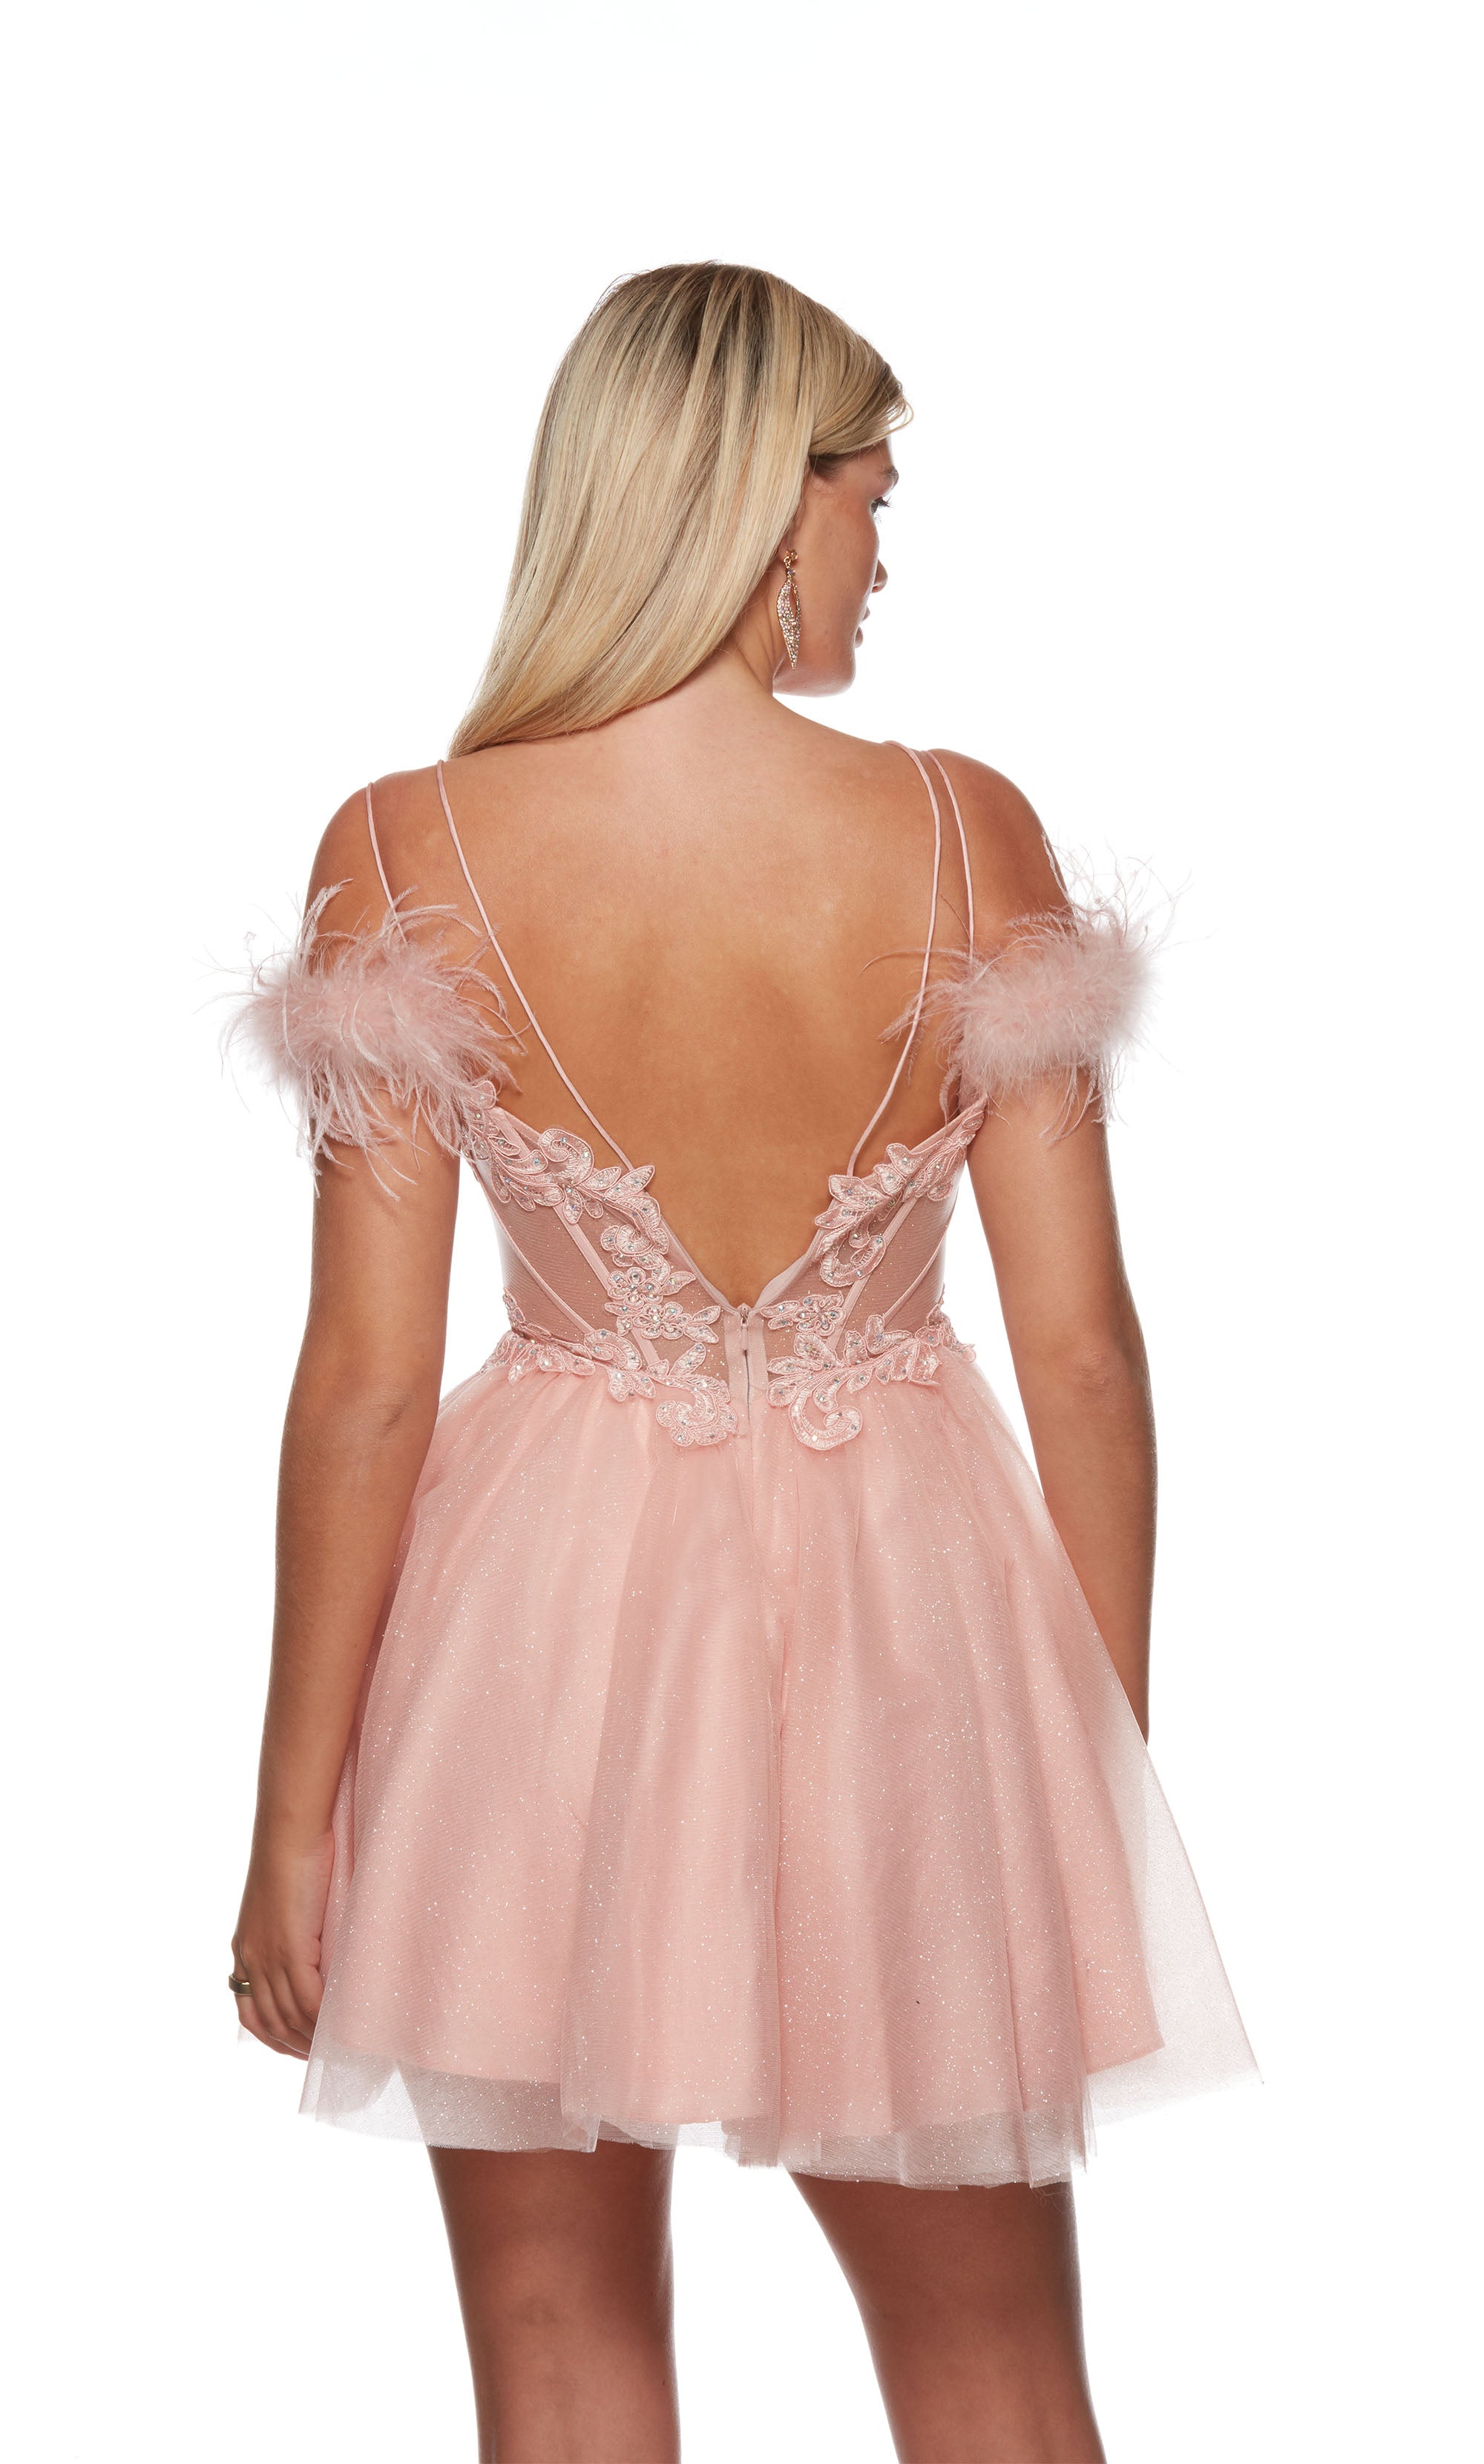 A stunning off-the-shoulder short corset dress with spaghetti straps, adorned with intricate lace detailing and feather trim, designed to make a stylish statement.